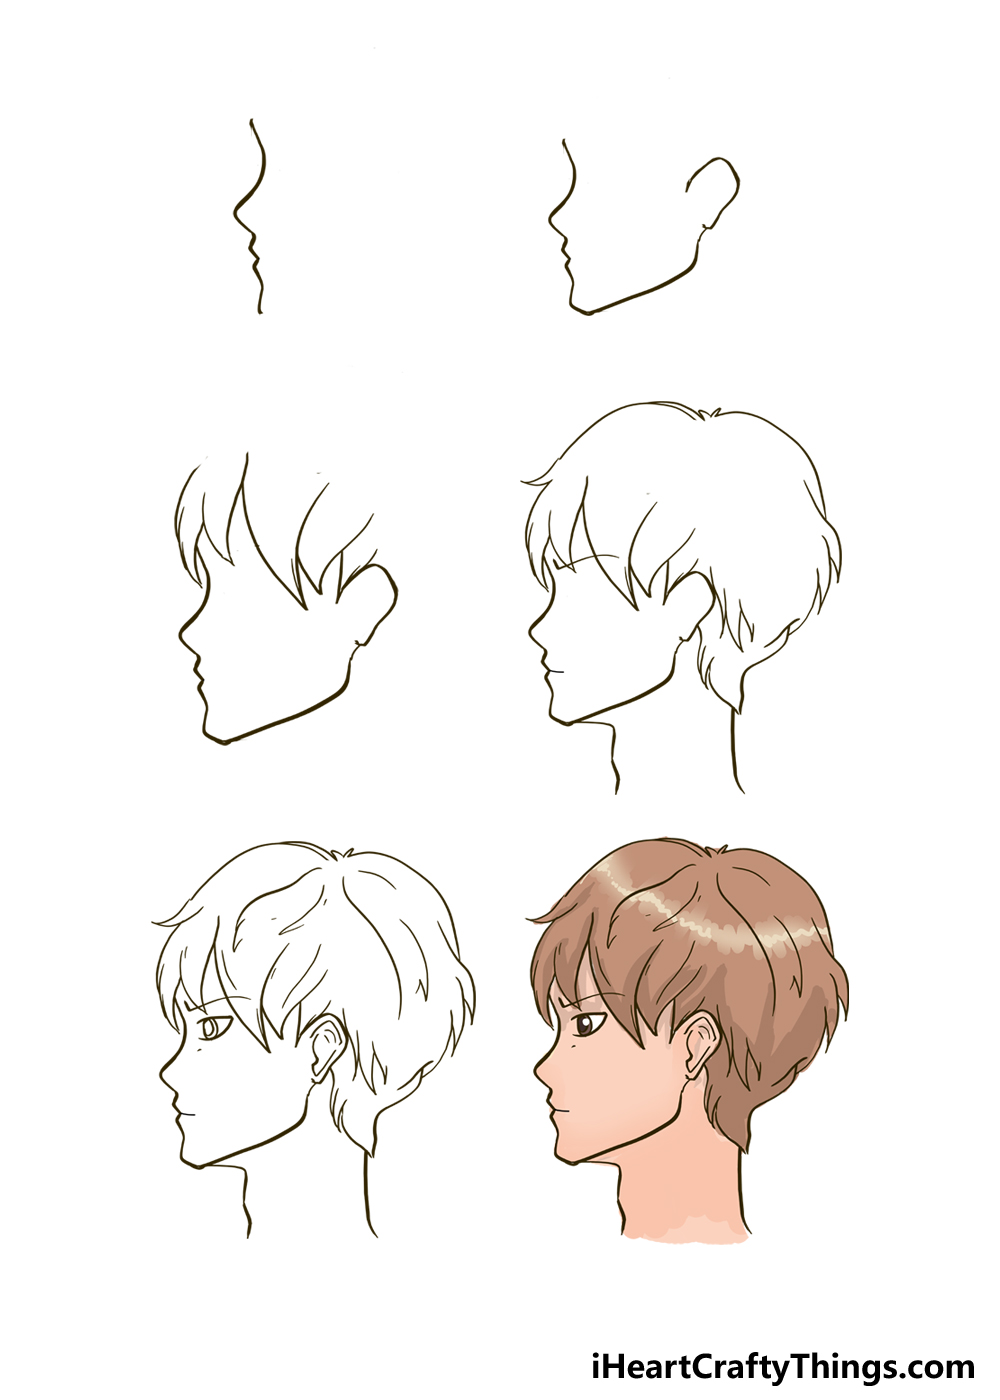 How to Draw An Anime Side Profile